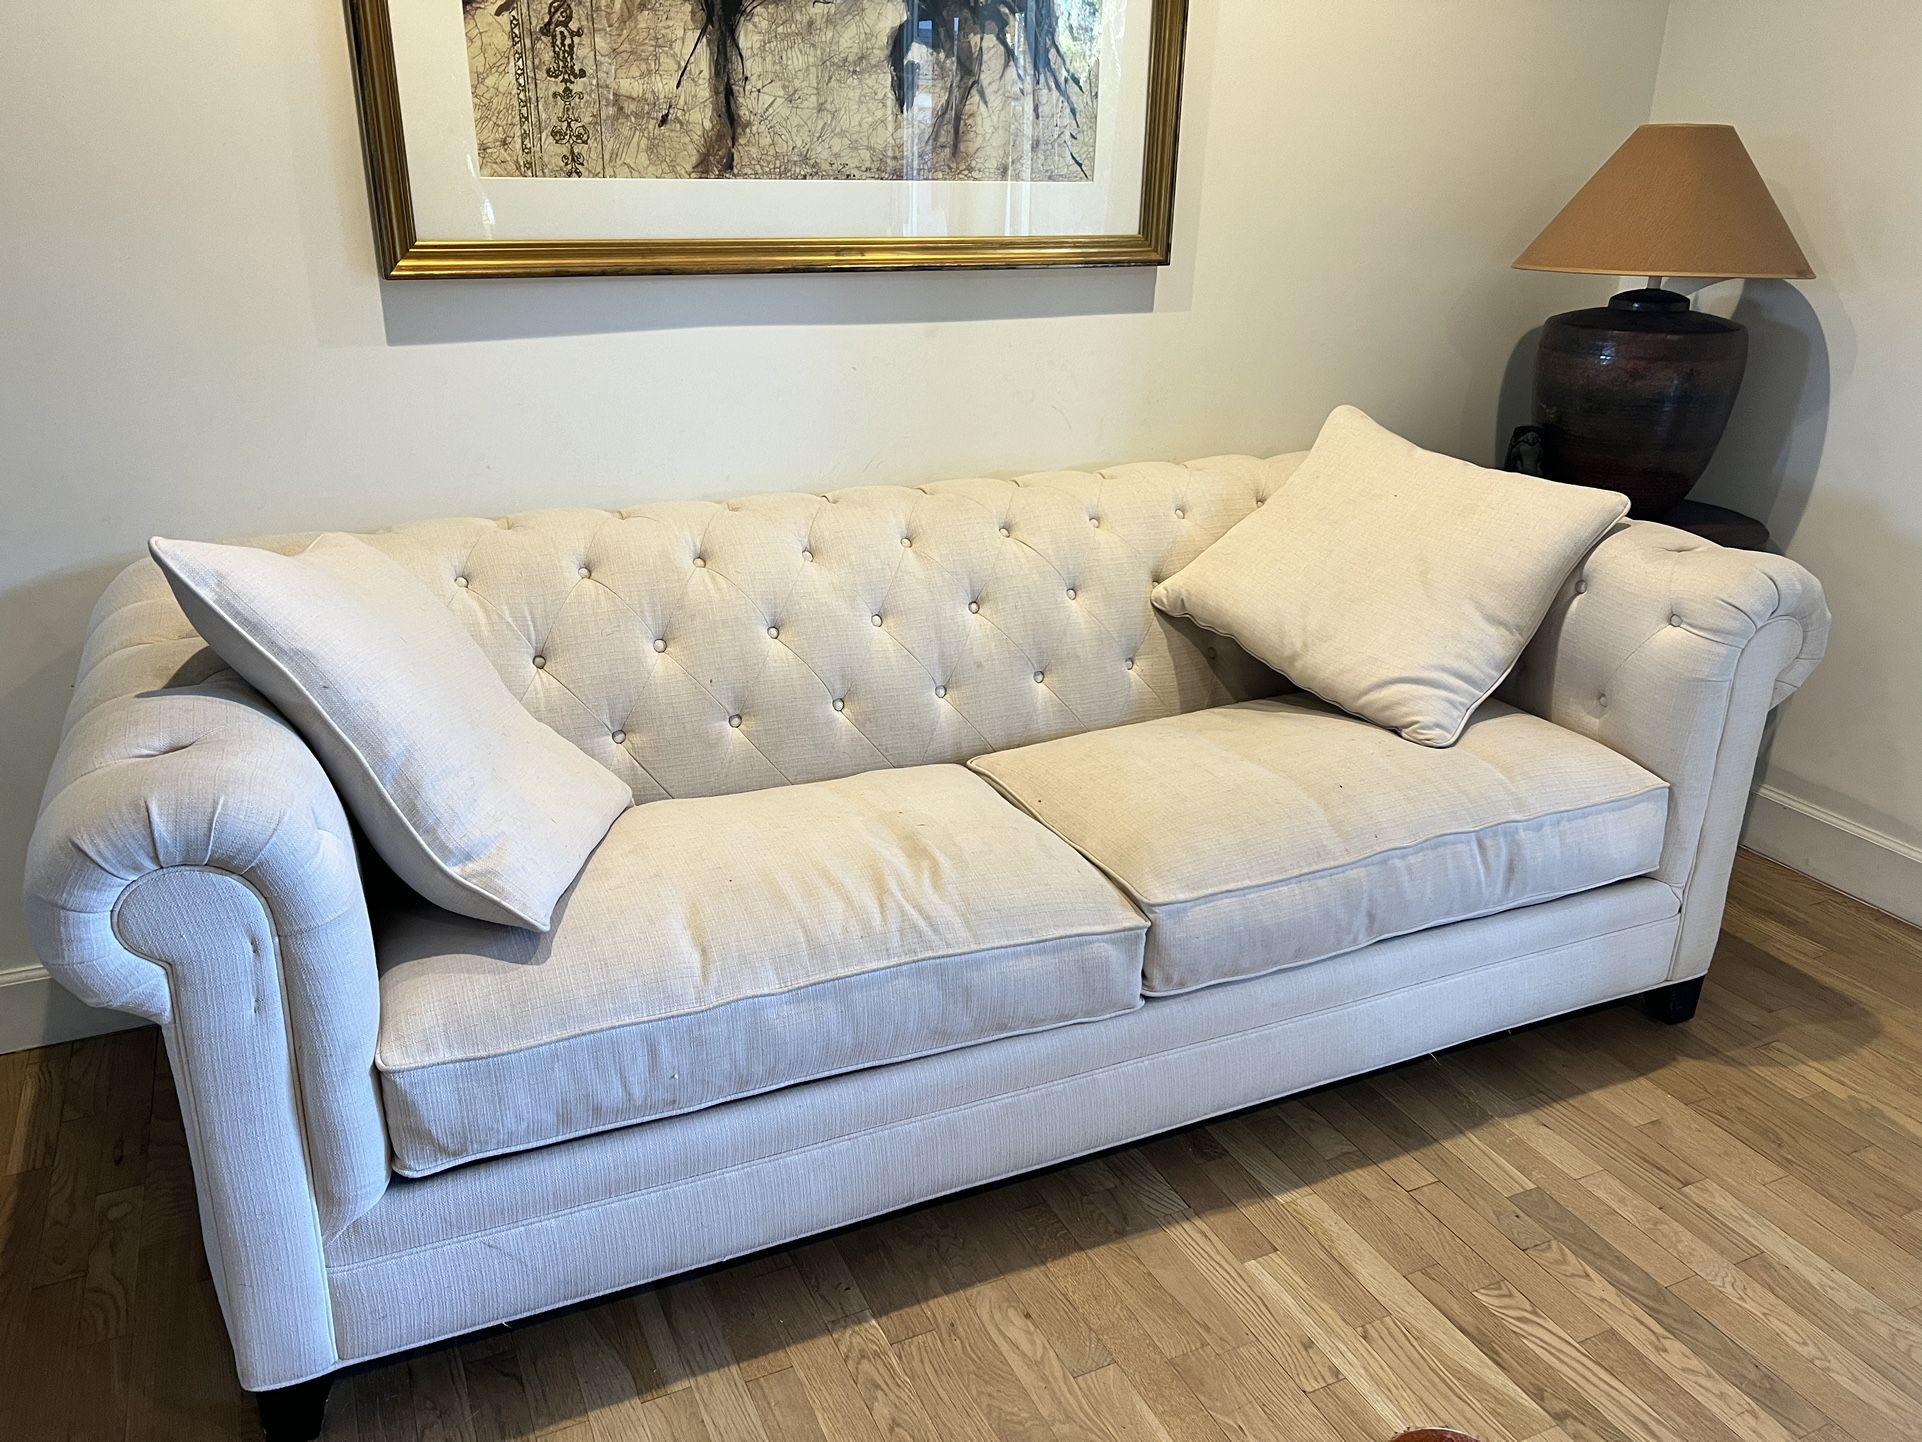 Two Tufted Couches $100 each